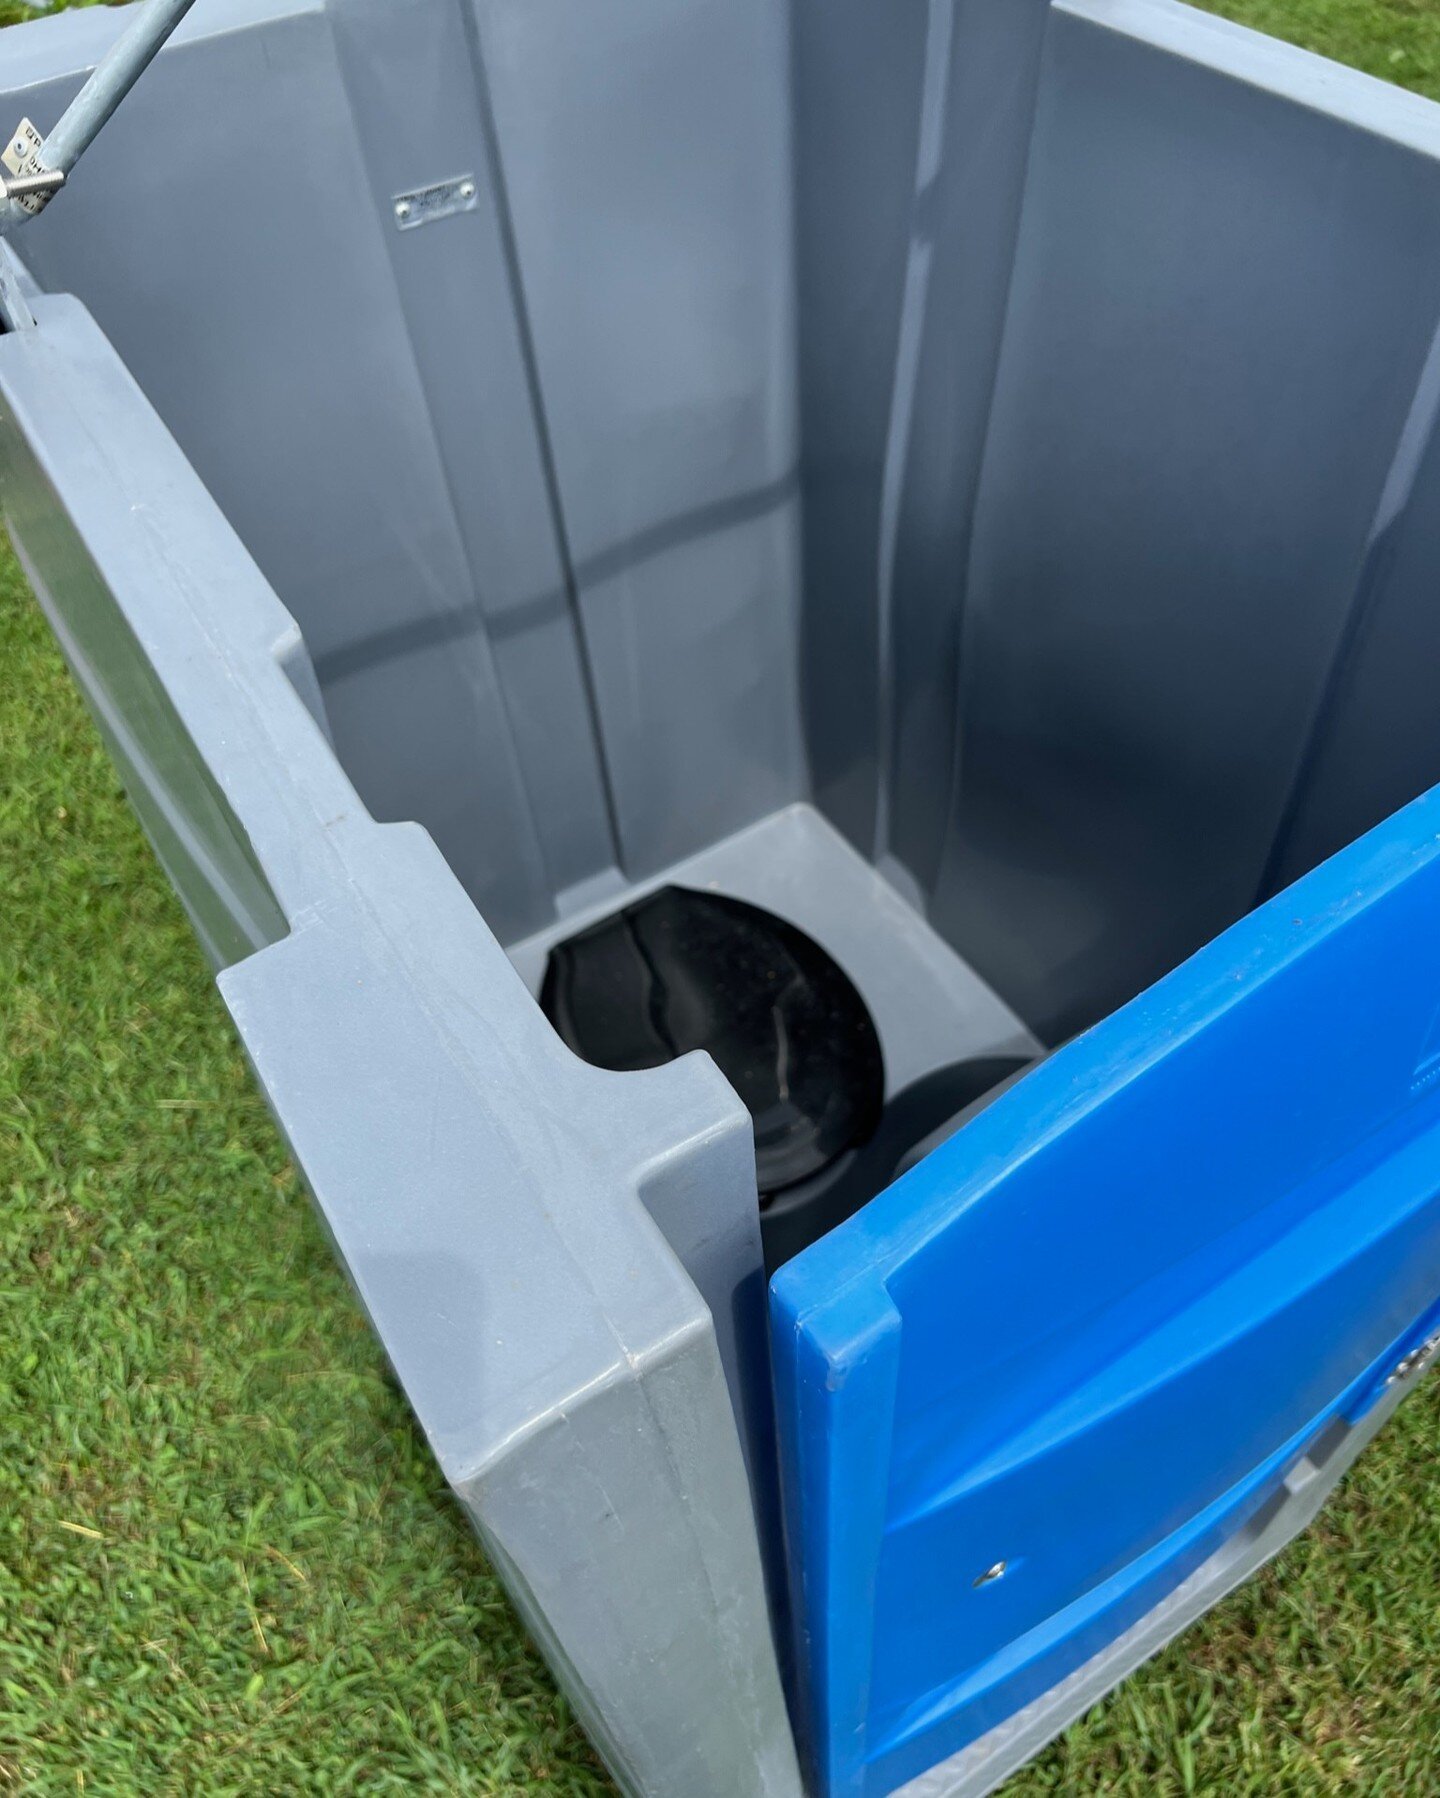 Boss, there's no roof on this porta potty! Don't worry, that's just so it can be lifted to different floors at your construction site. There is a top that goes on afterward. LOL. 
www.chiefpartypoopers.com
#chiefpartypoopers #portablerestroom #portop